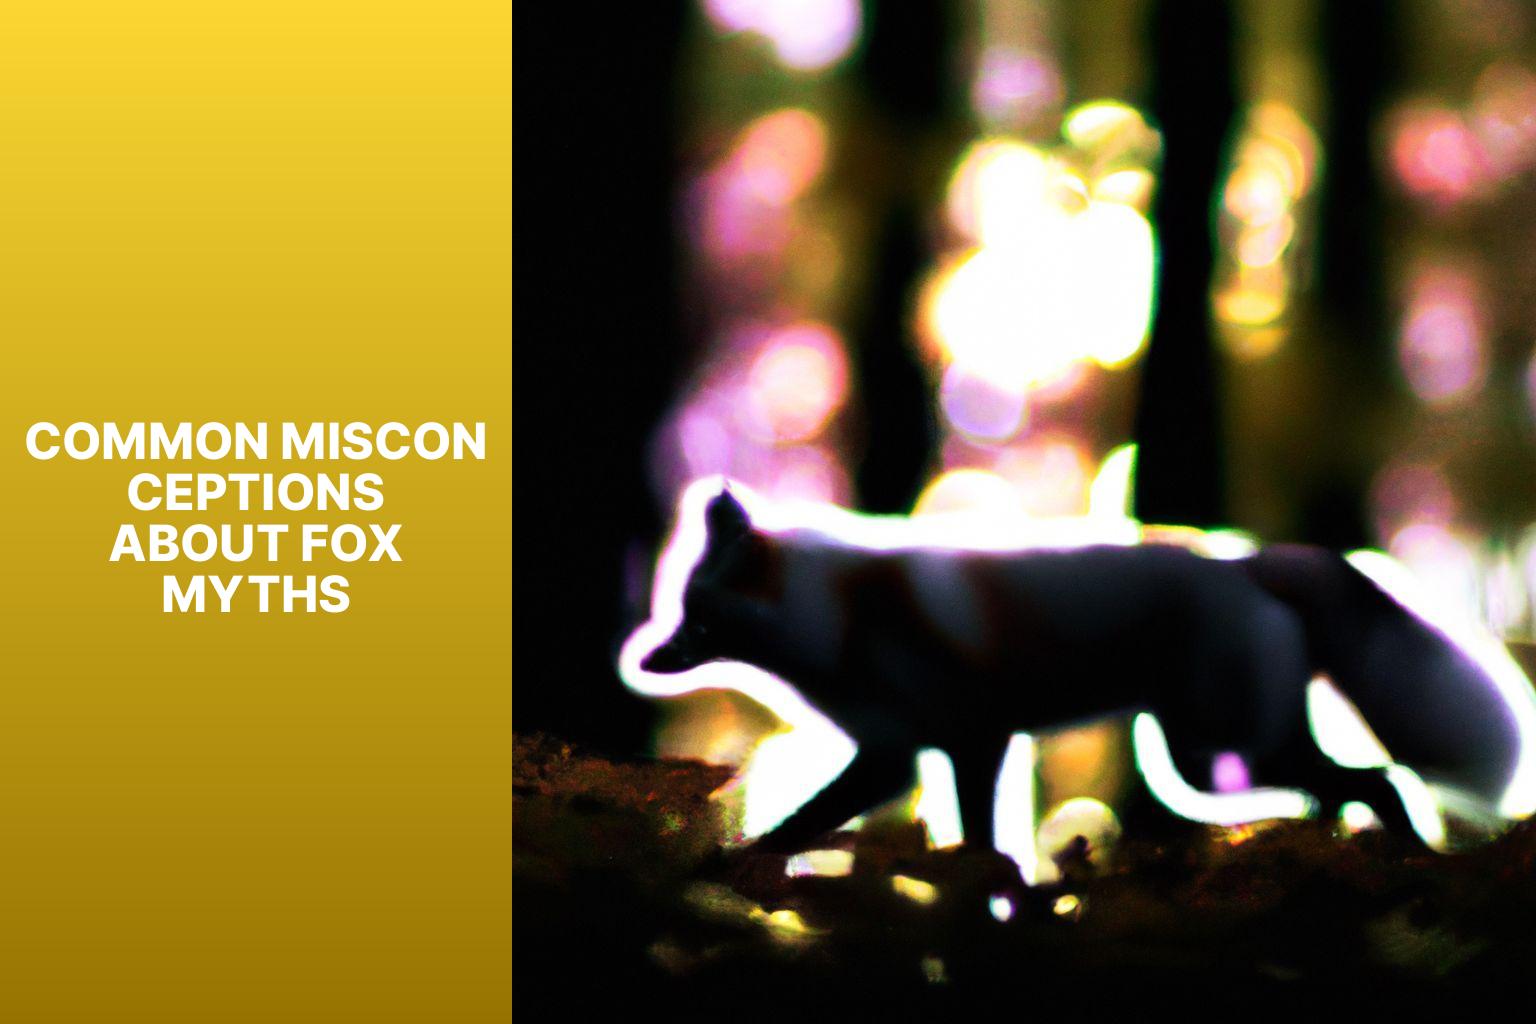 Common Misconceptions about Fox Myths - Fox Myths in Spiritualism 